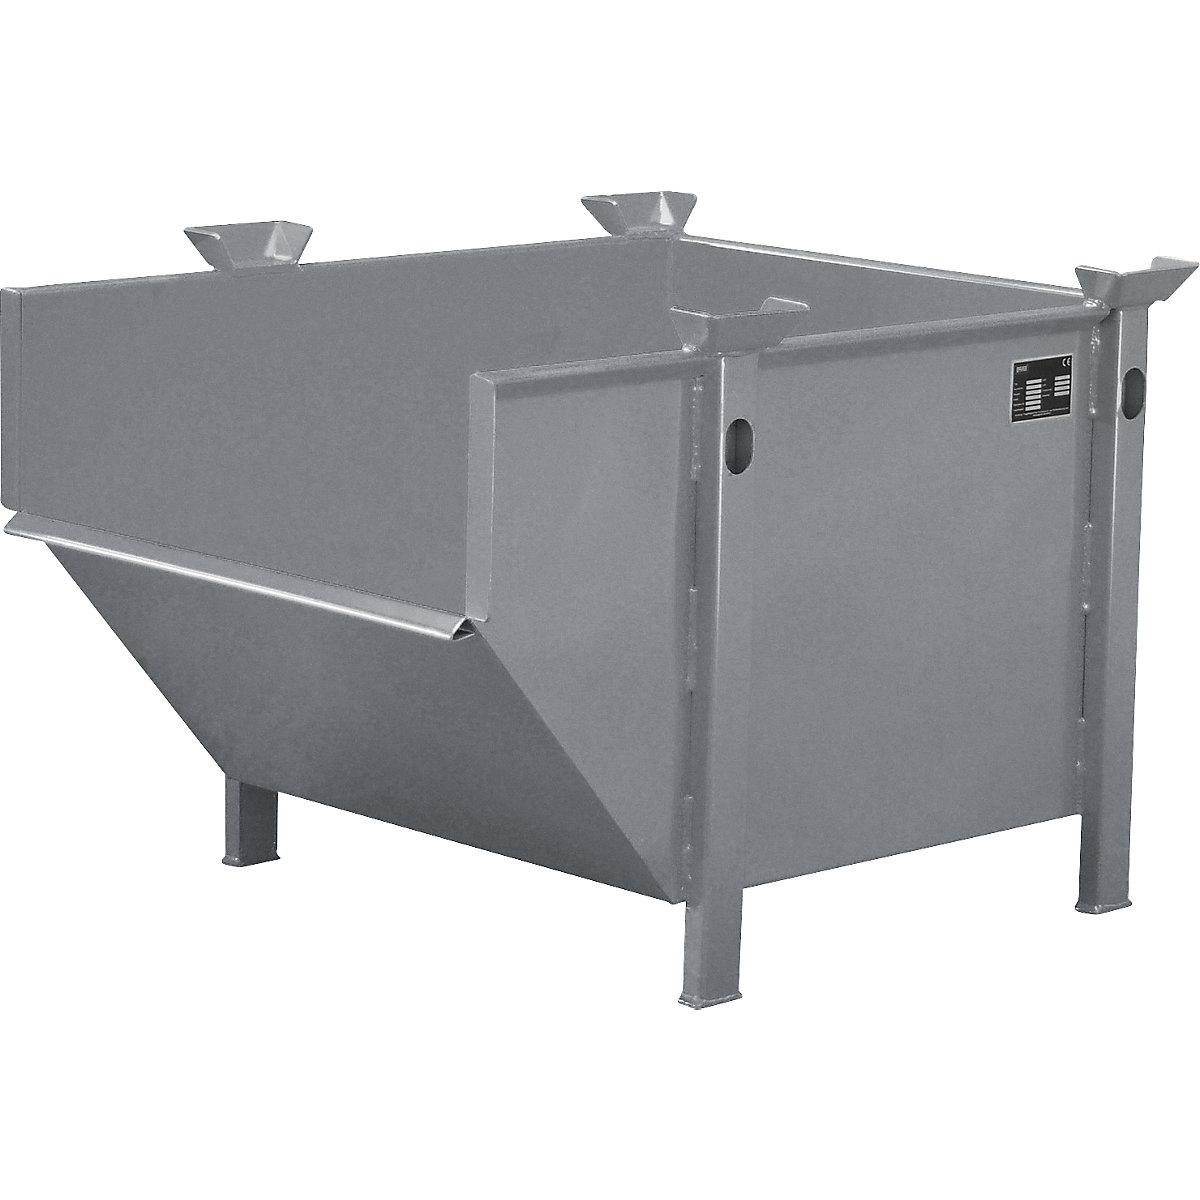 Sheet steel container – eurokraft pro, capacity 0.5 m³, without folding chute, mouse grey-6